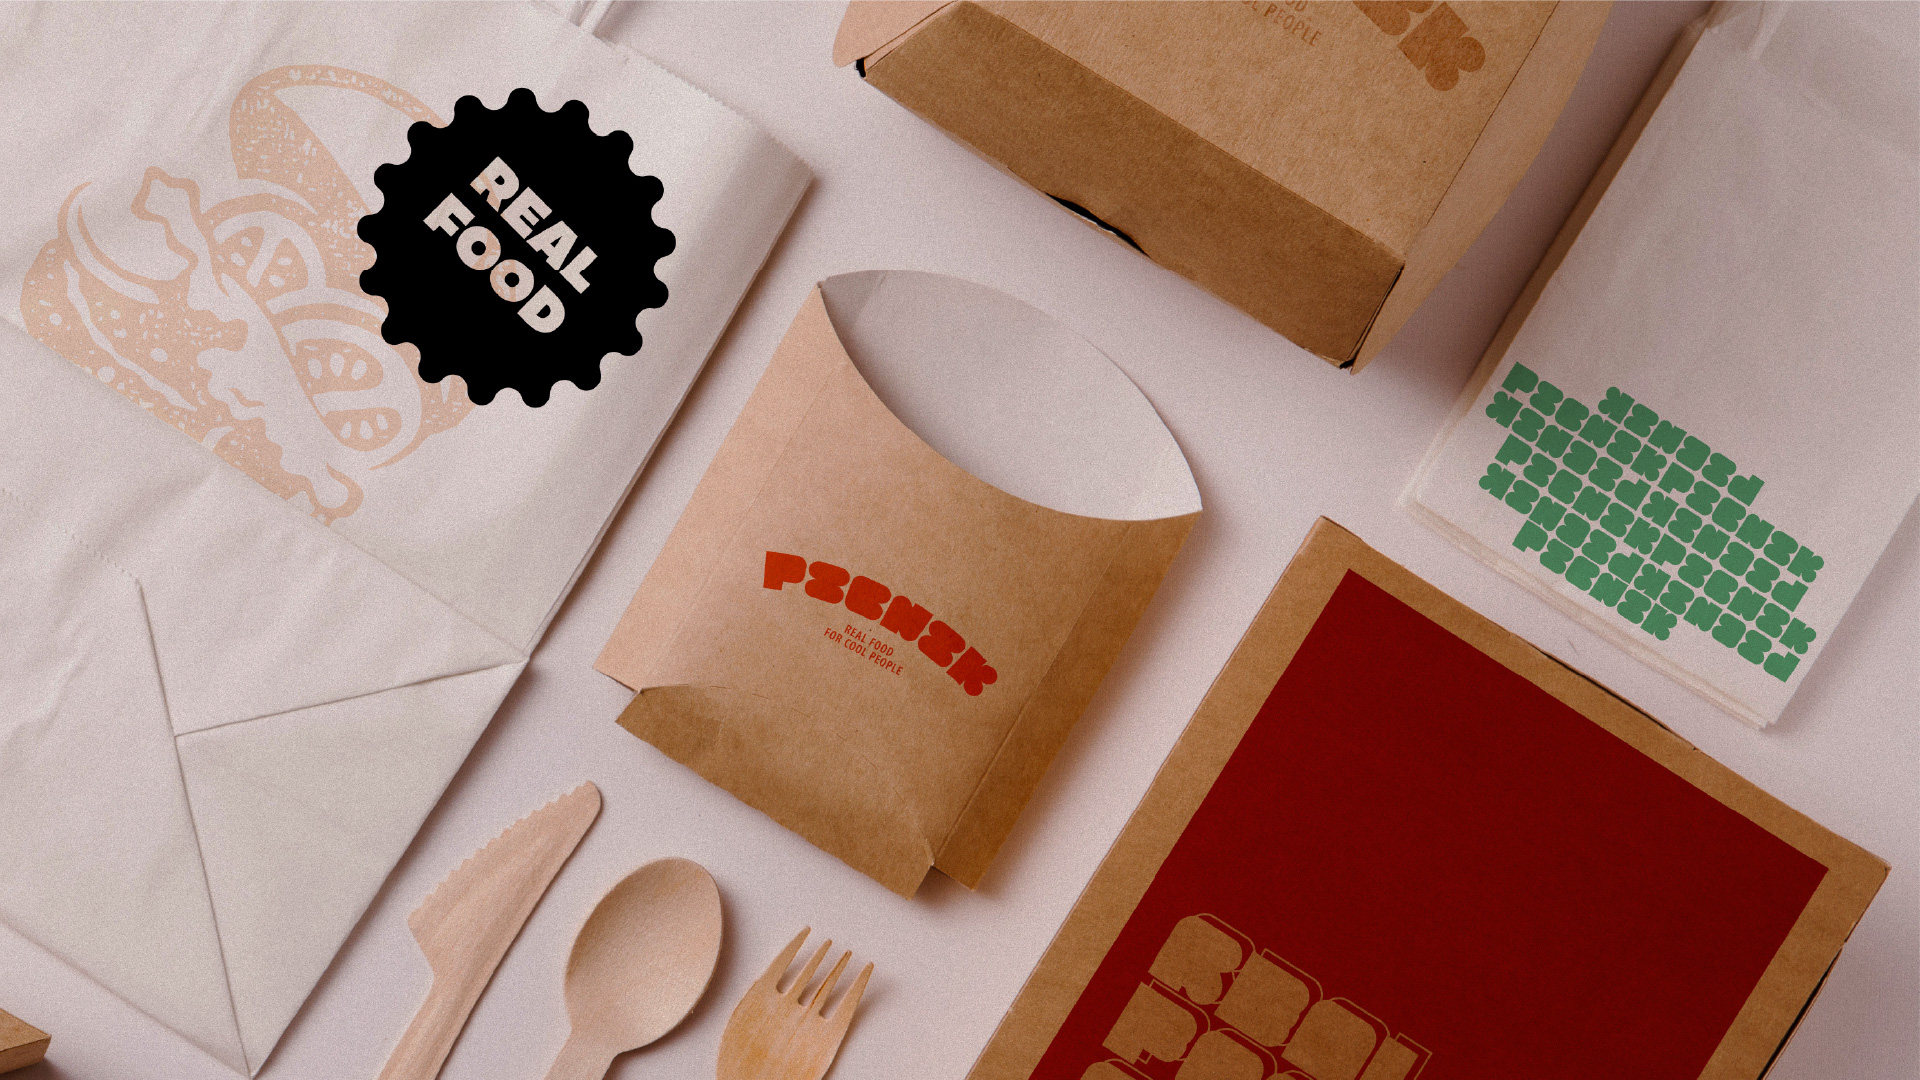 Picnik’s Branding and Packaging by Oiedesign